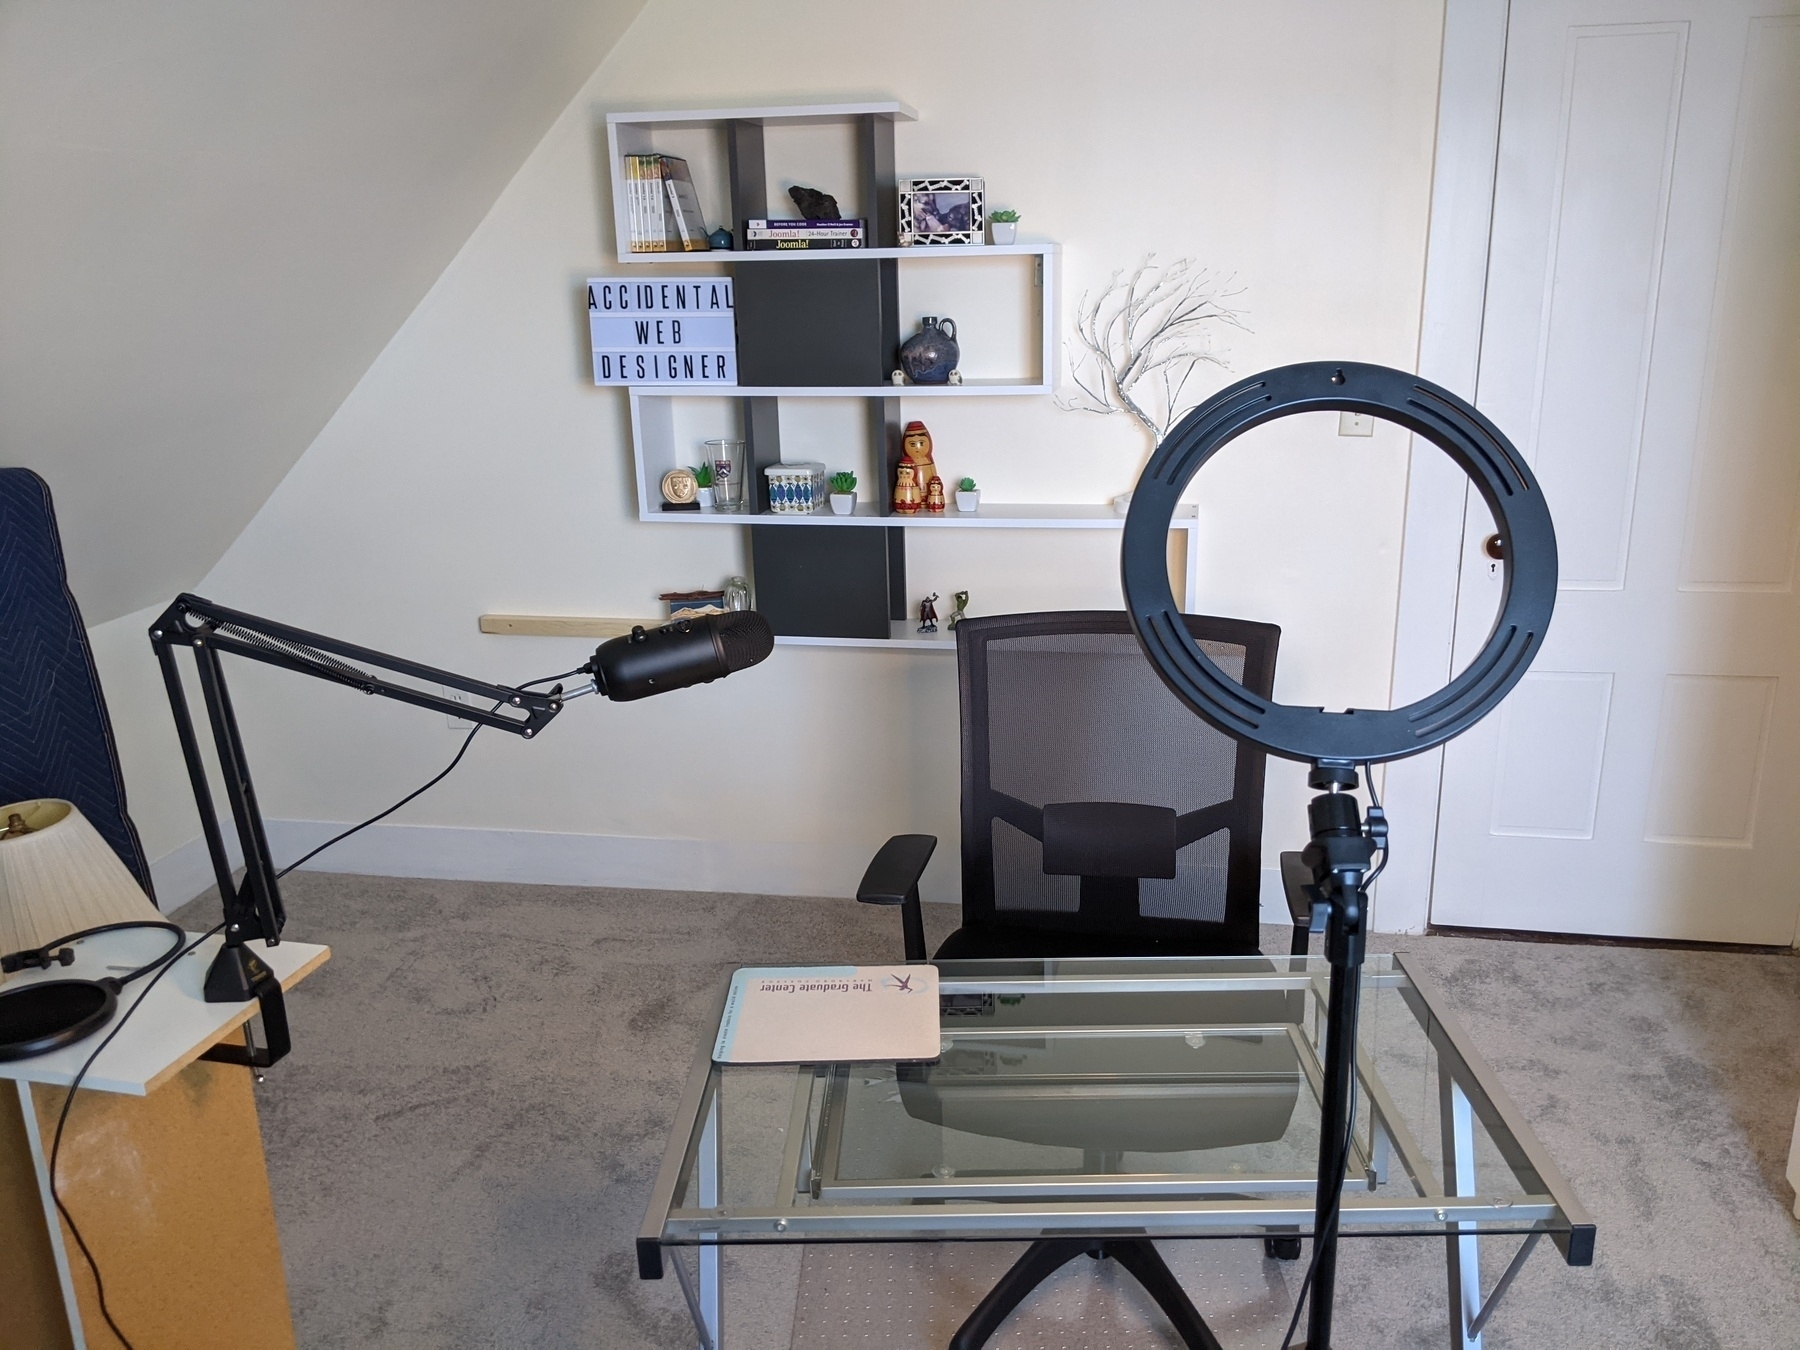 Photo of shelf on the wall, glass desk and chair, microphone on a boom.